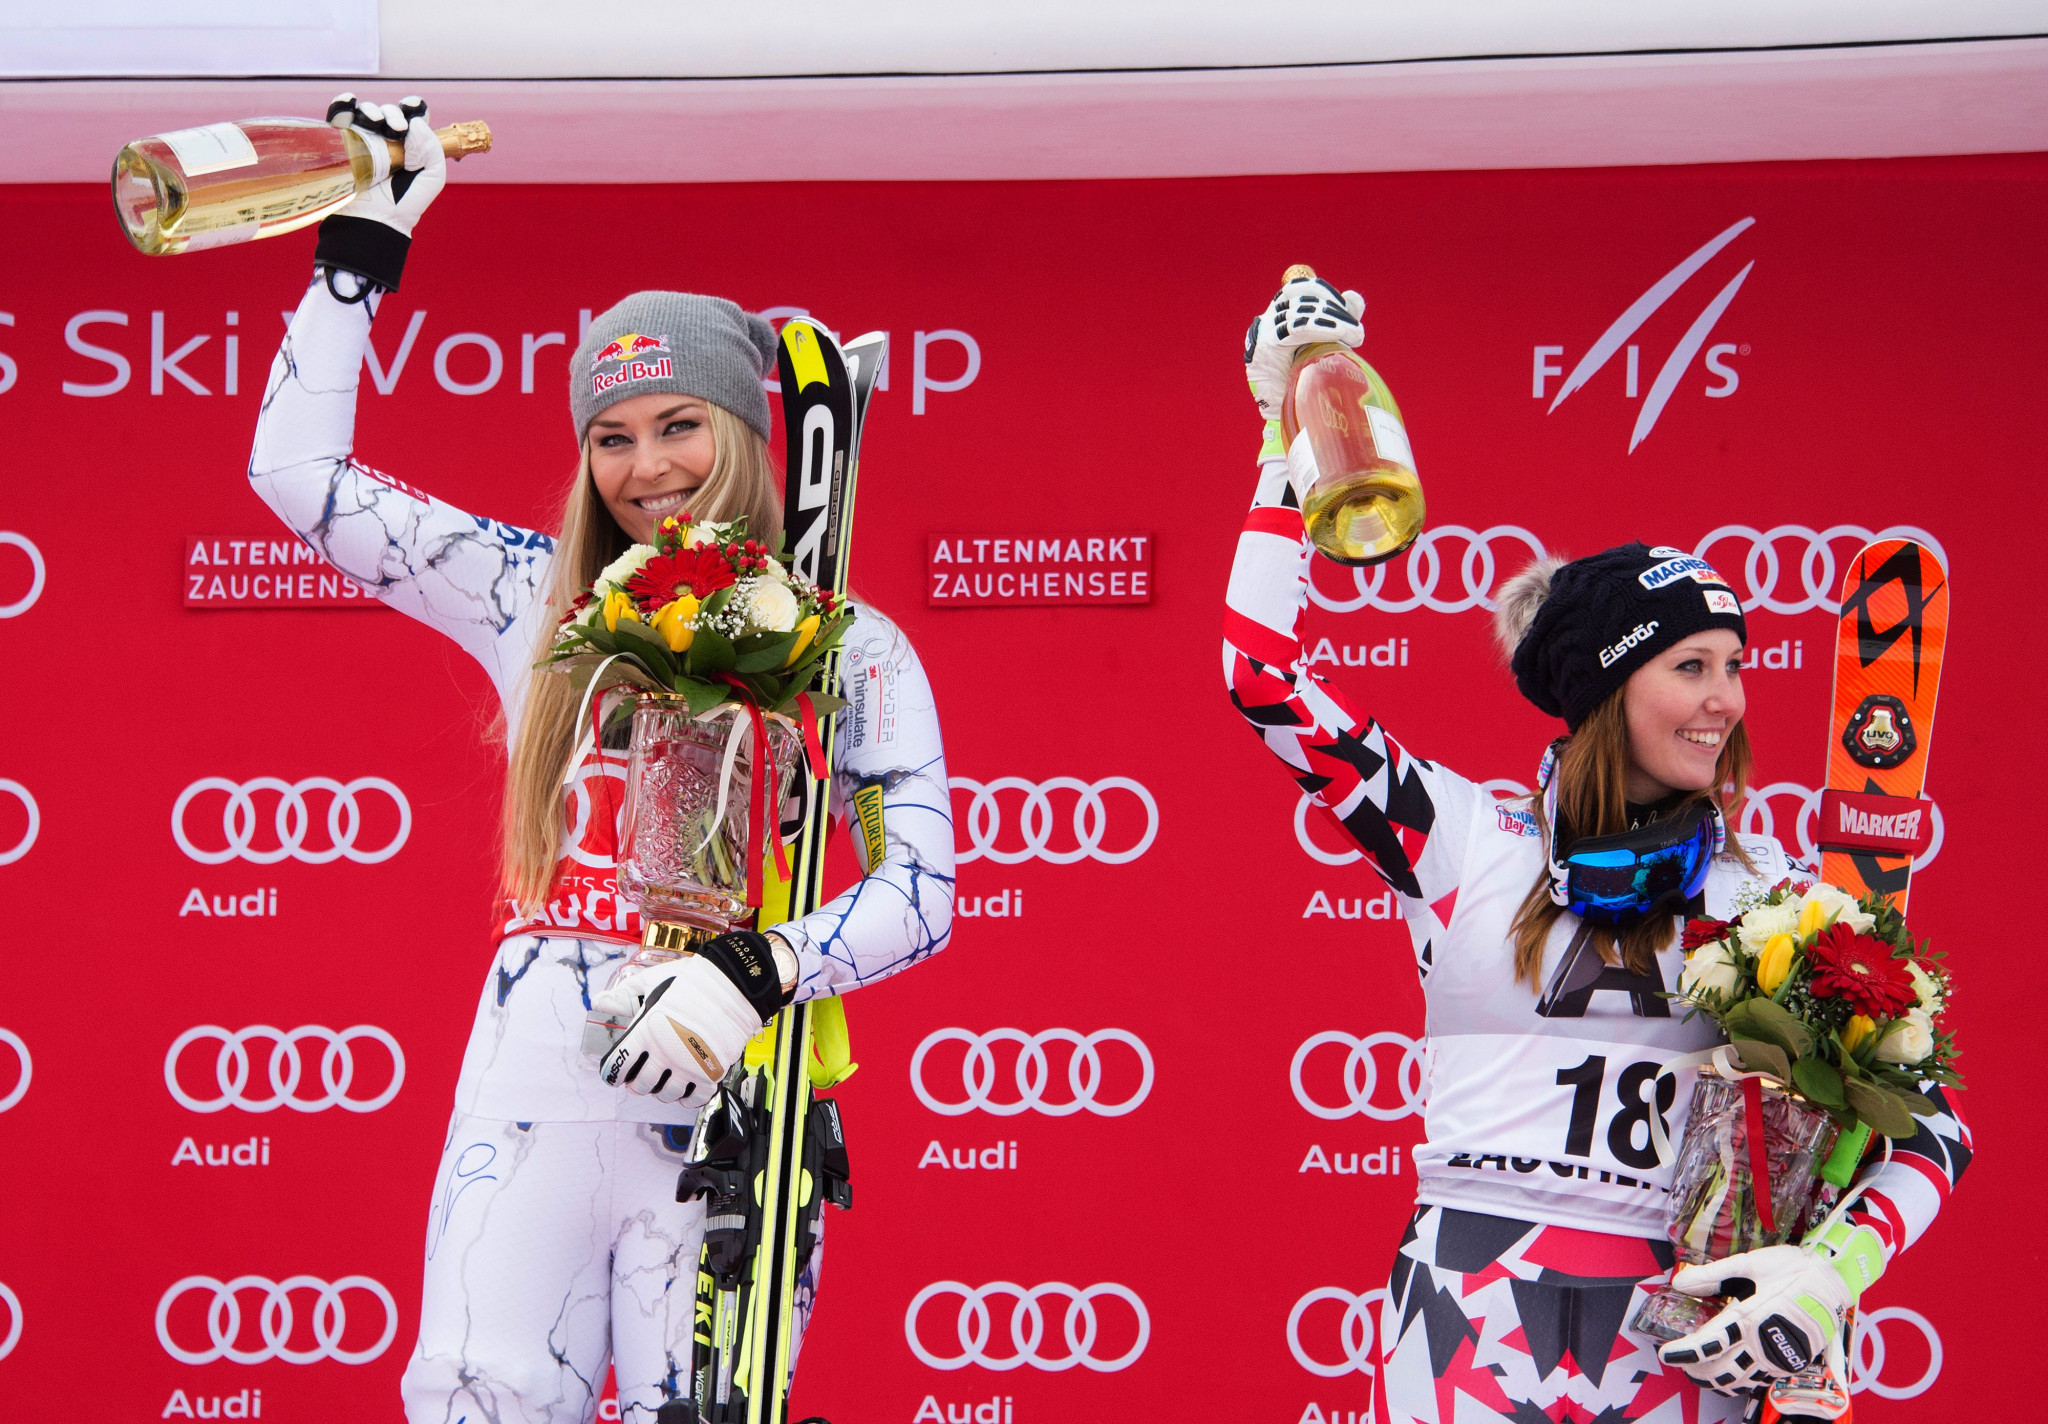 Downhill skiing icon Lindsey Vonn, left, will not compete in Lake Louise ©Getty Images